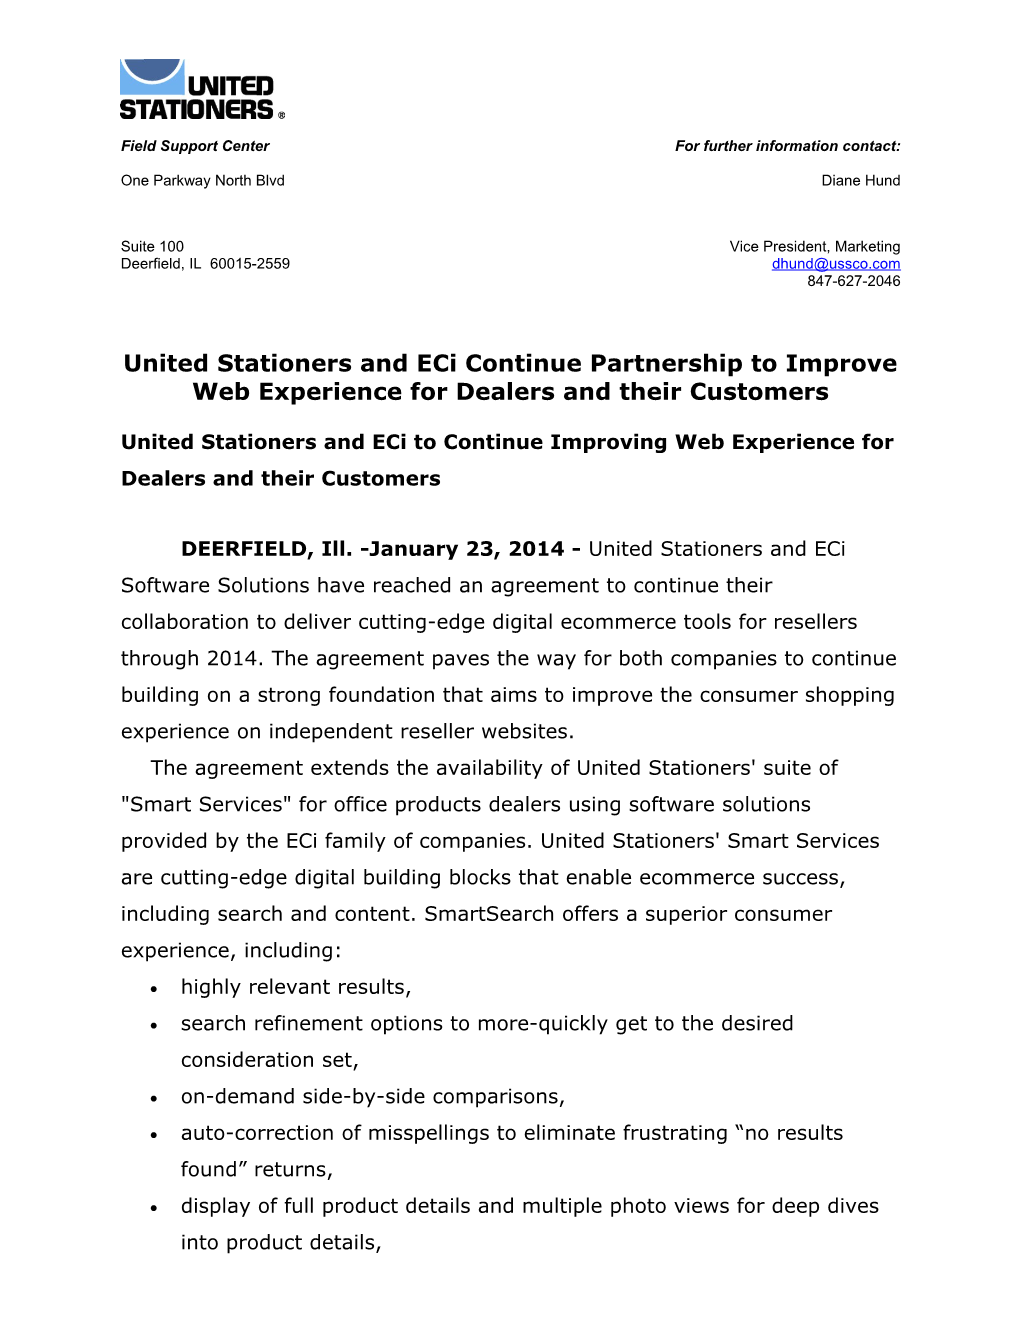 United Stationers and Eci Continue Partnership to Improve Web Experience for Dealers And